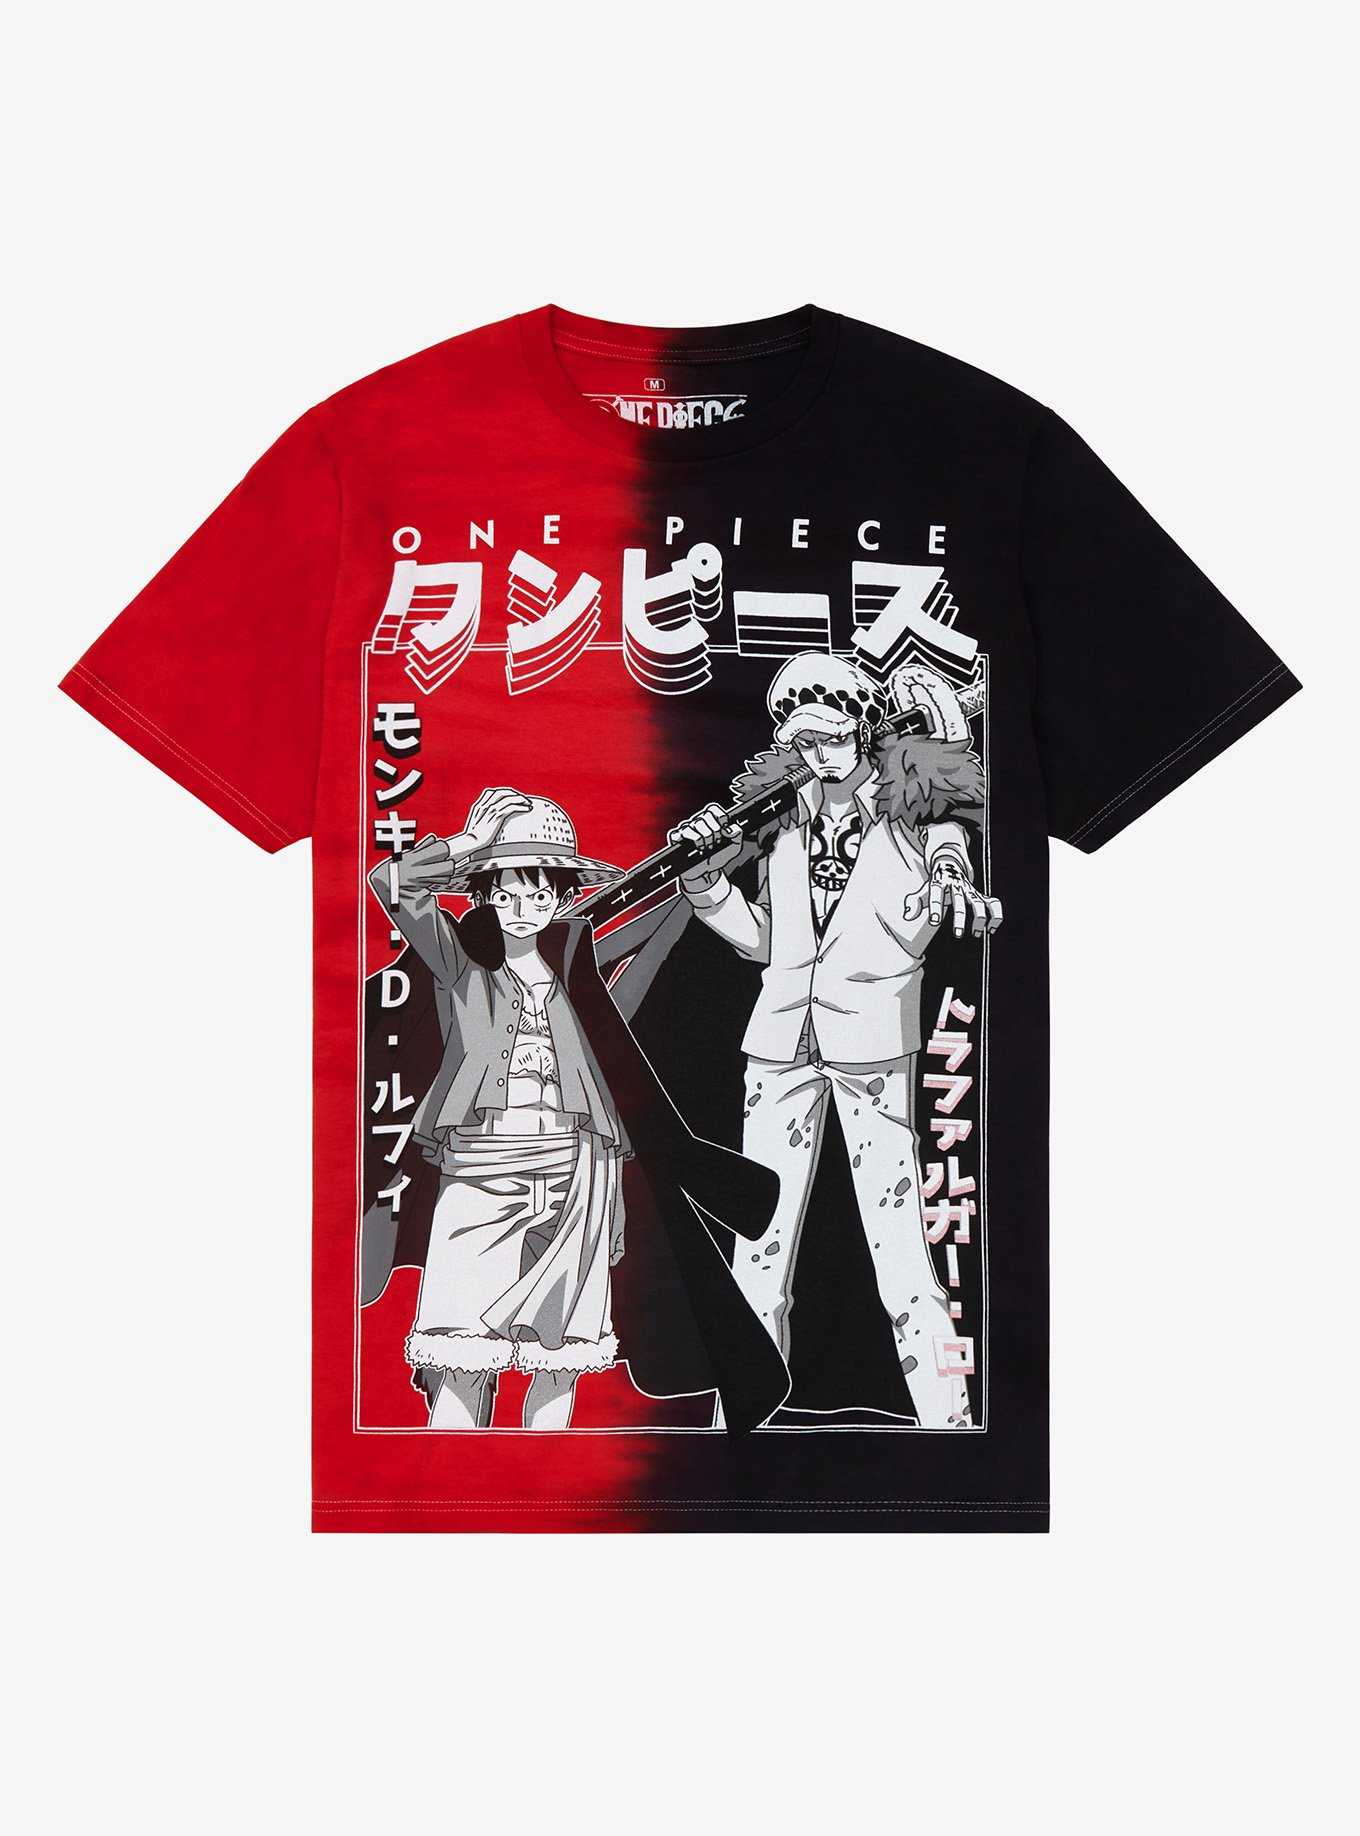 GEAR by partjay  One piece merchandise, One piece anime, Black pink songs